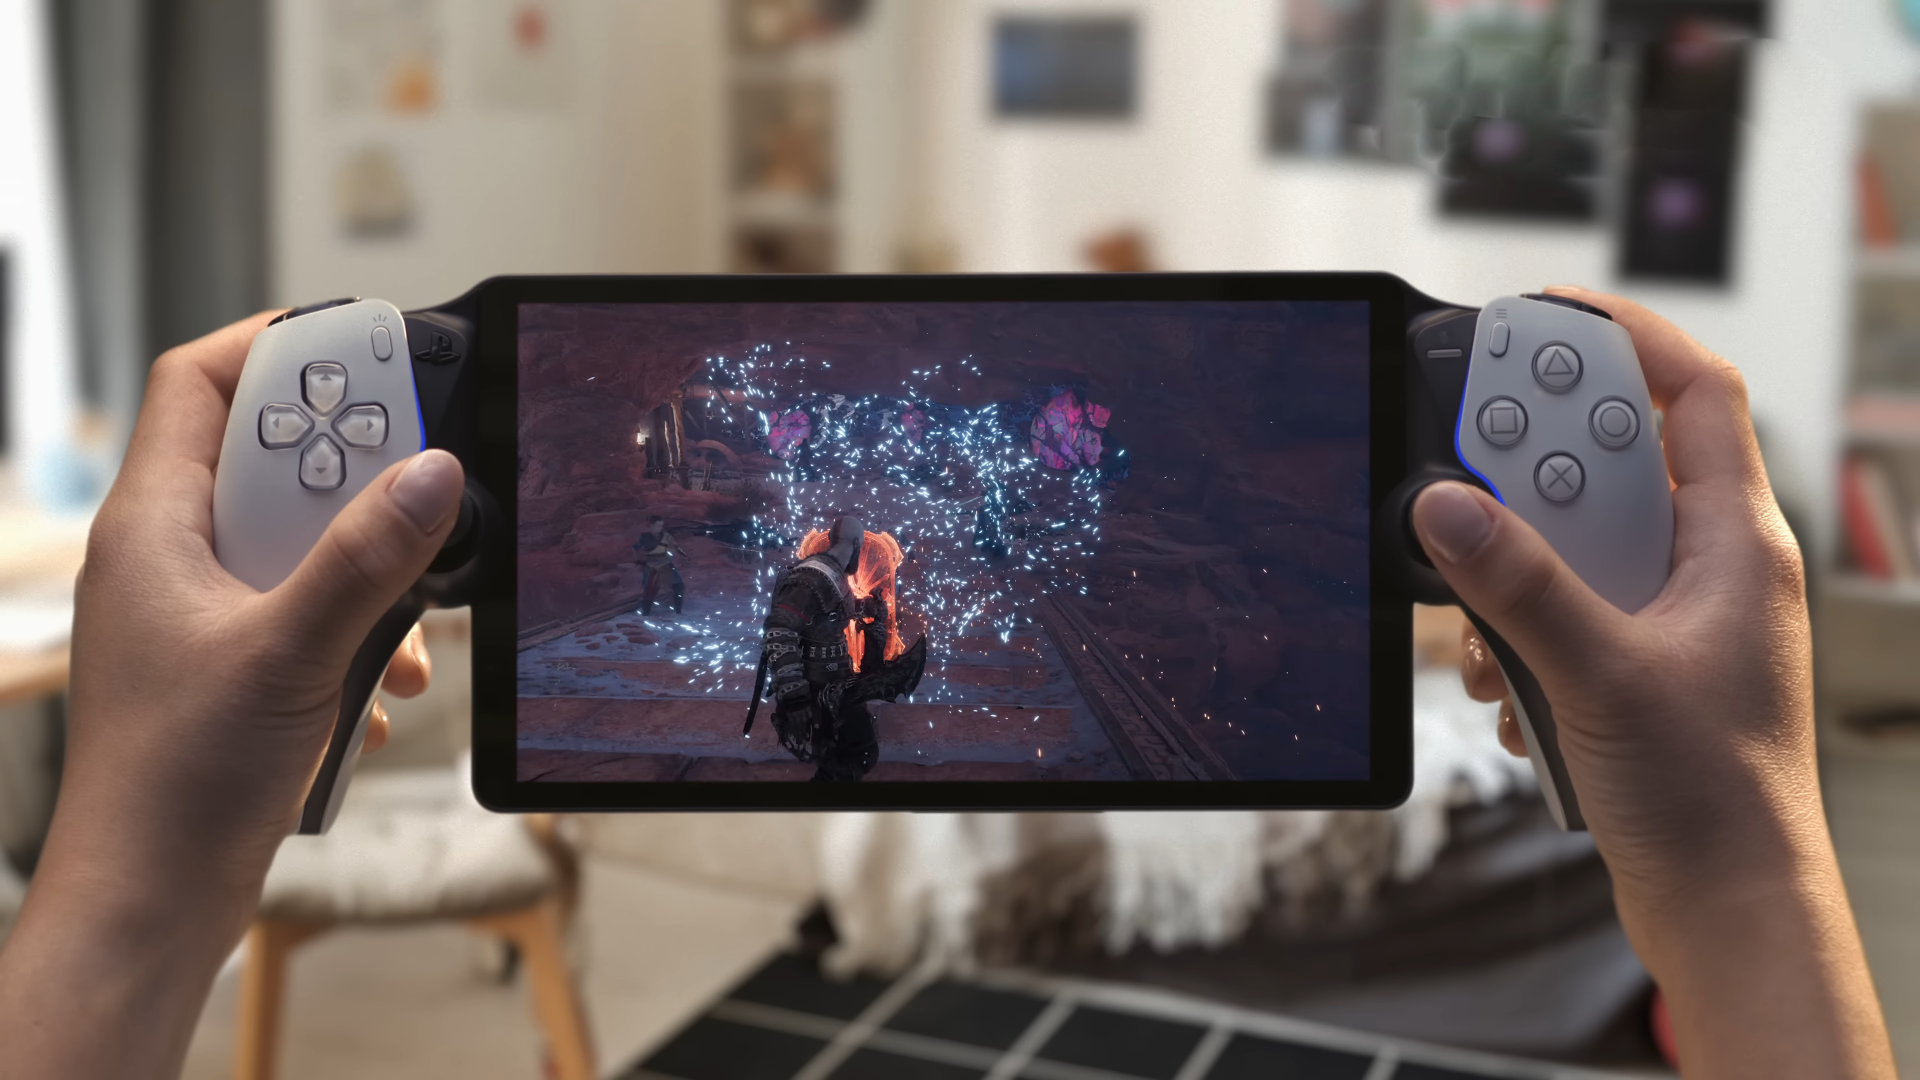 PlayStation Portal: Hands On With Sony's New Remote Play Handheld 